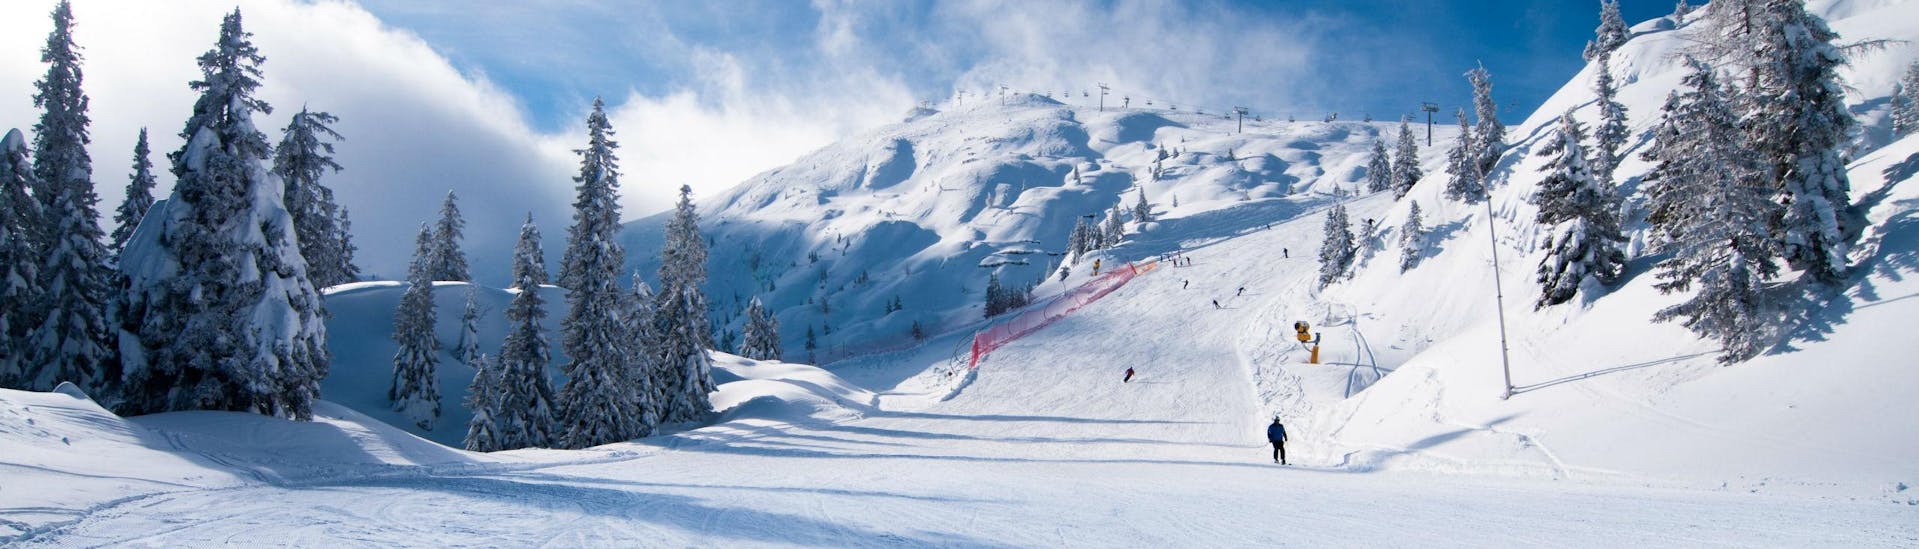 A group of skiers can be seen skiing down a freshly groomed ski slope in the Italian ski resort of Paganella Ski, where local ski schools offer a variety of ski lessons.